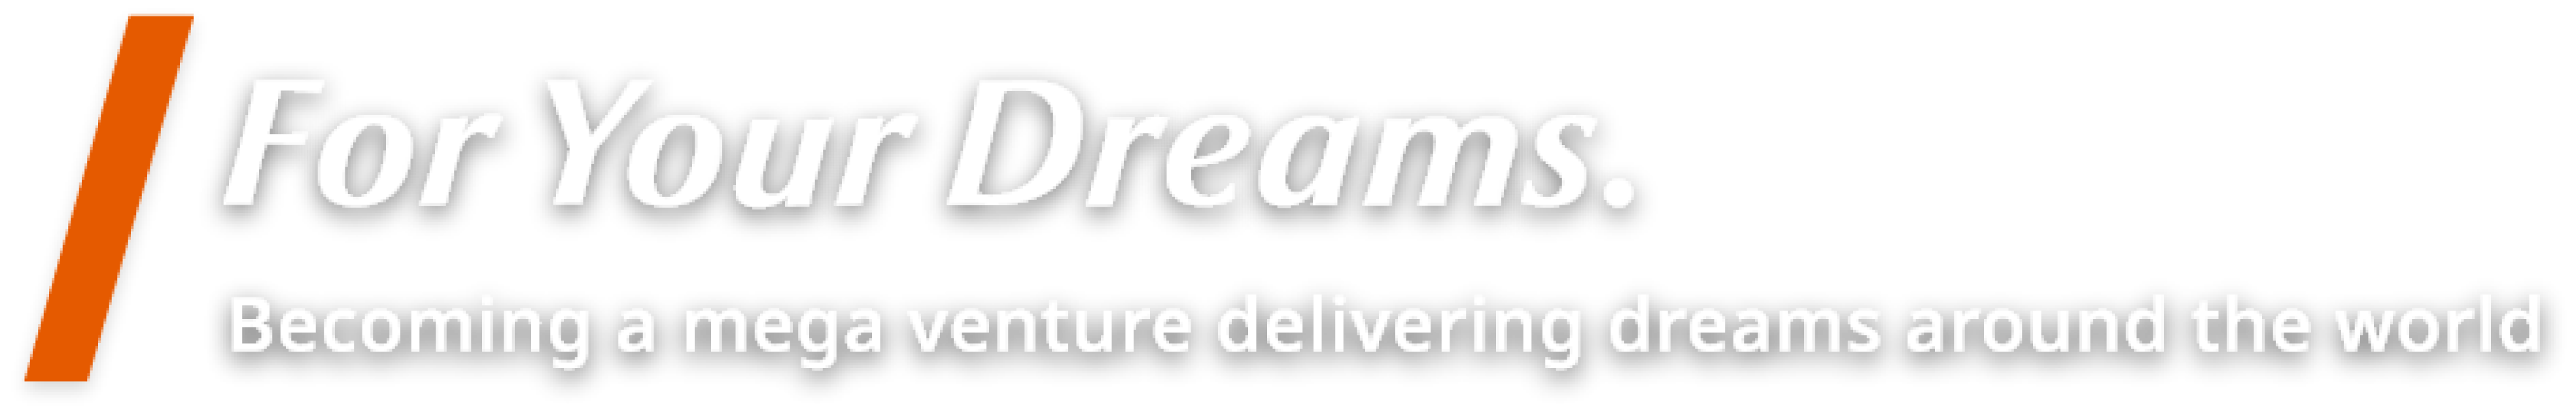 For Your Dreams. Becoming a mega venture delivering dreams around the world